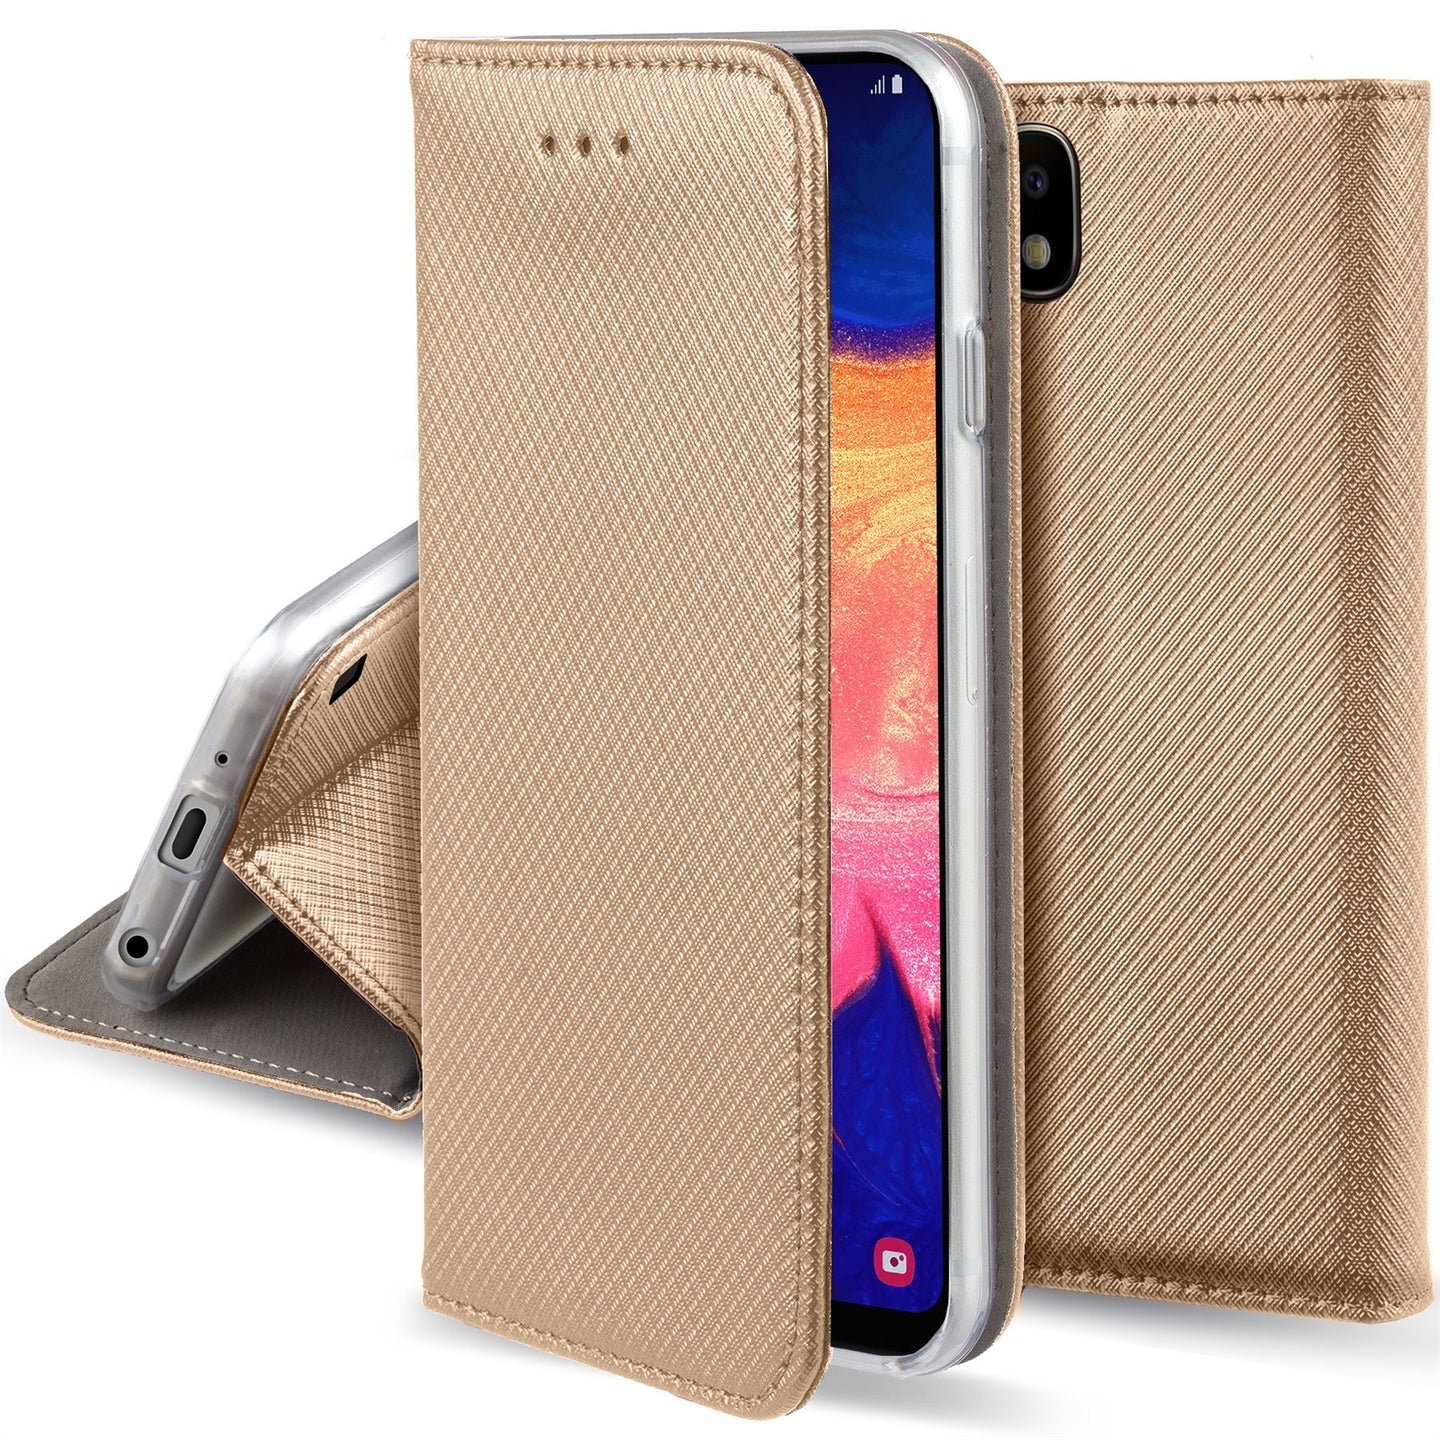 Moozy Case Flip Cover for Samsung A10, Gold - Smart Magnetic Flip Case with Card Holder and Stand